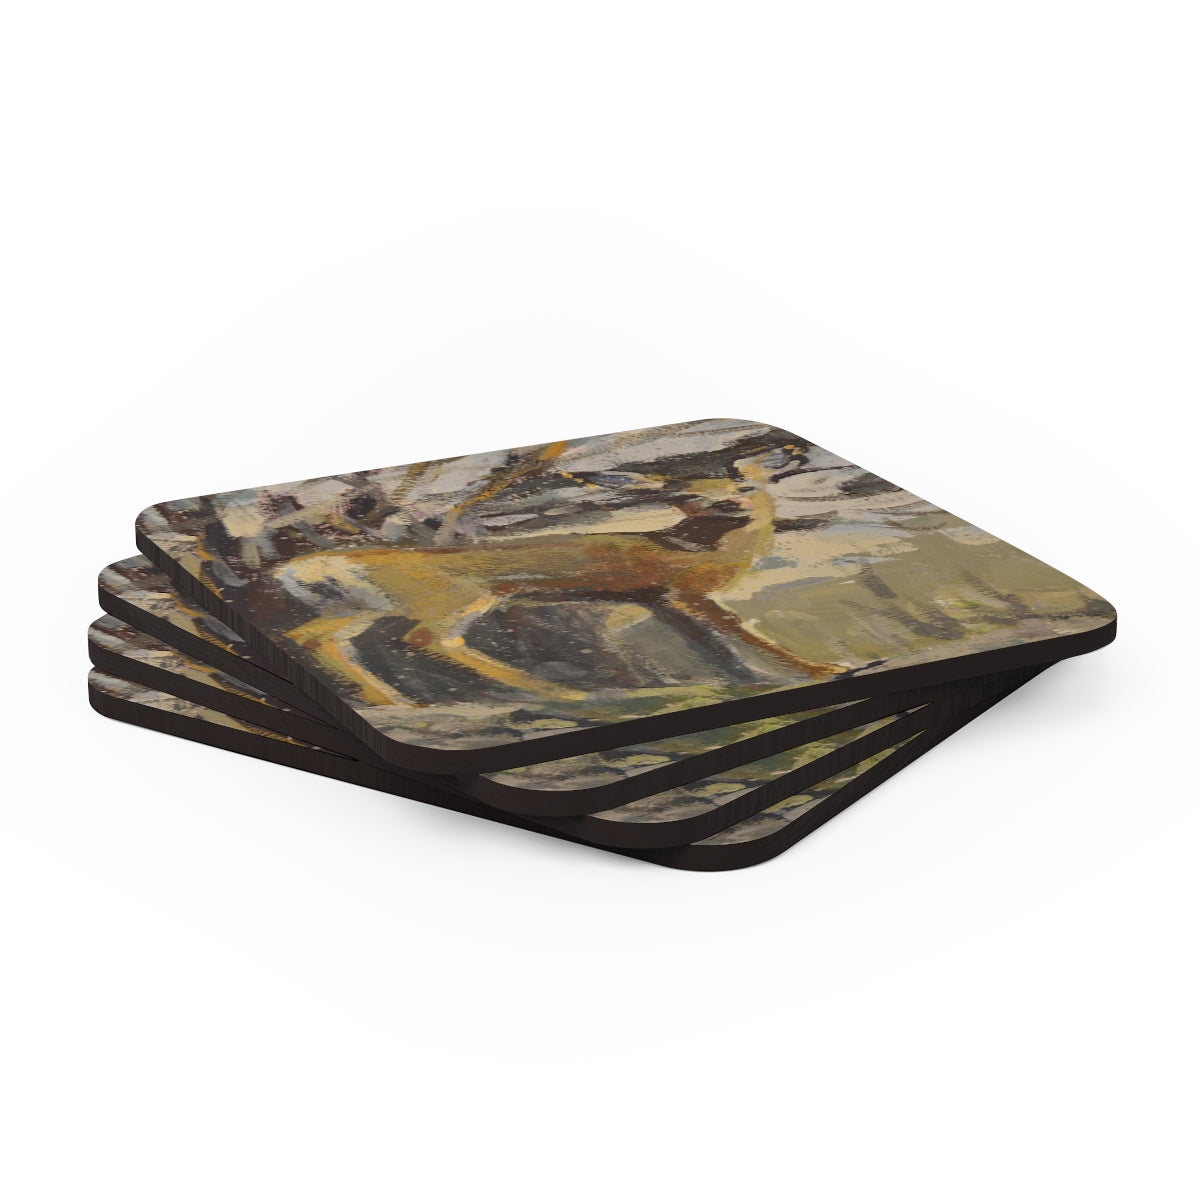 "Such a Deer", by Kristina Sellers, Corkwood Coaster Set